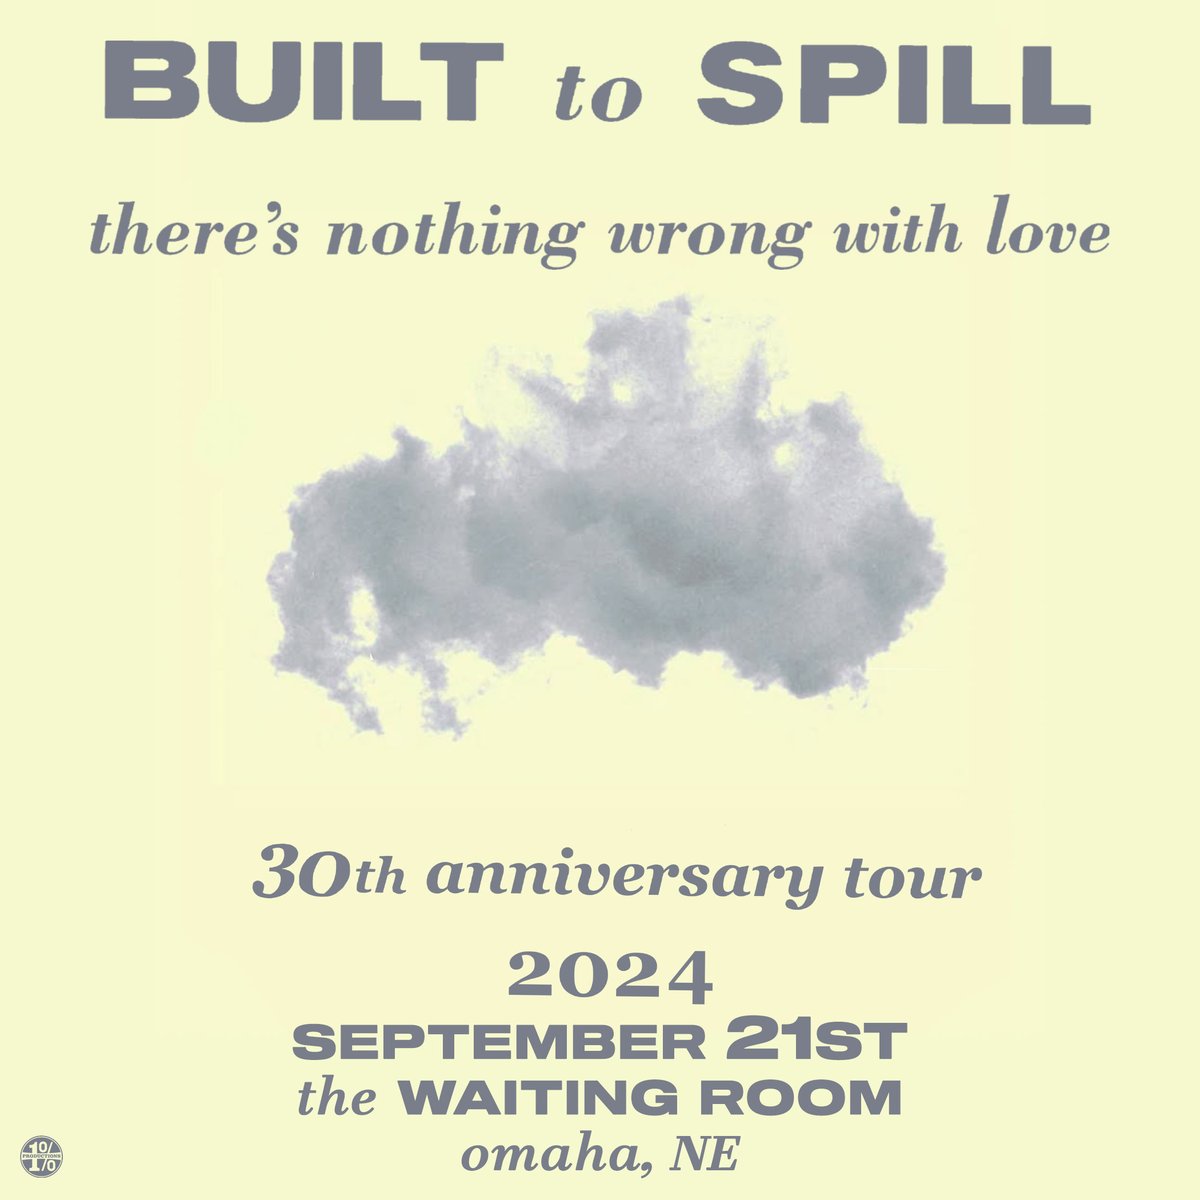 Built to Spill is celebrating 30 years of 'There's’ Nothing Wrong with Love! See them at The Waiting Room on sept. 21st, performing the full album LIVE Tickets go on sale FRIDAY at 10 AM 🎫 etix.com/ticket/p/54684…